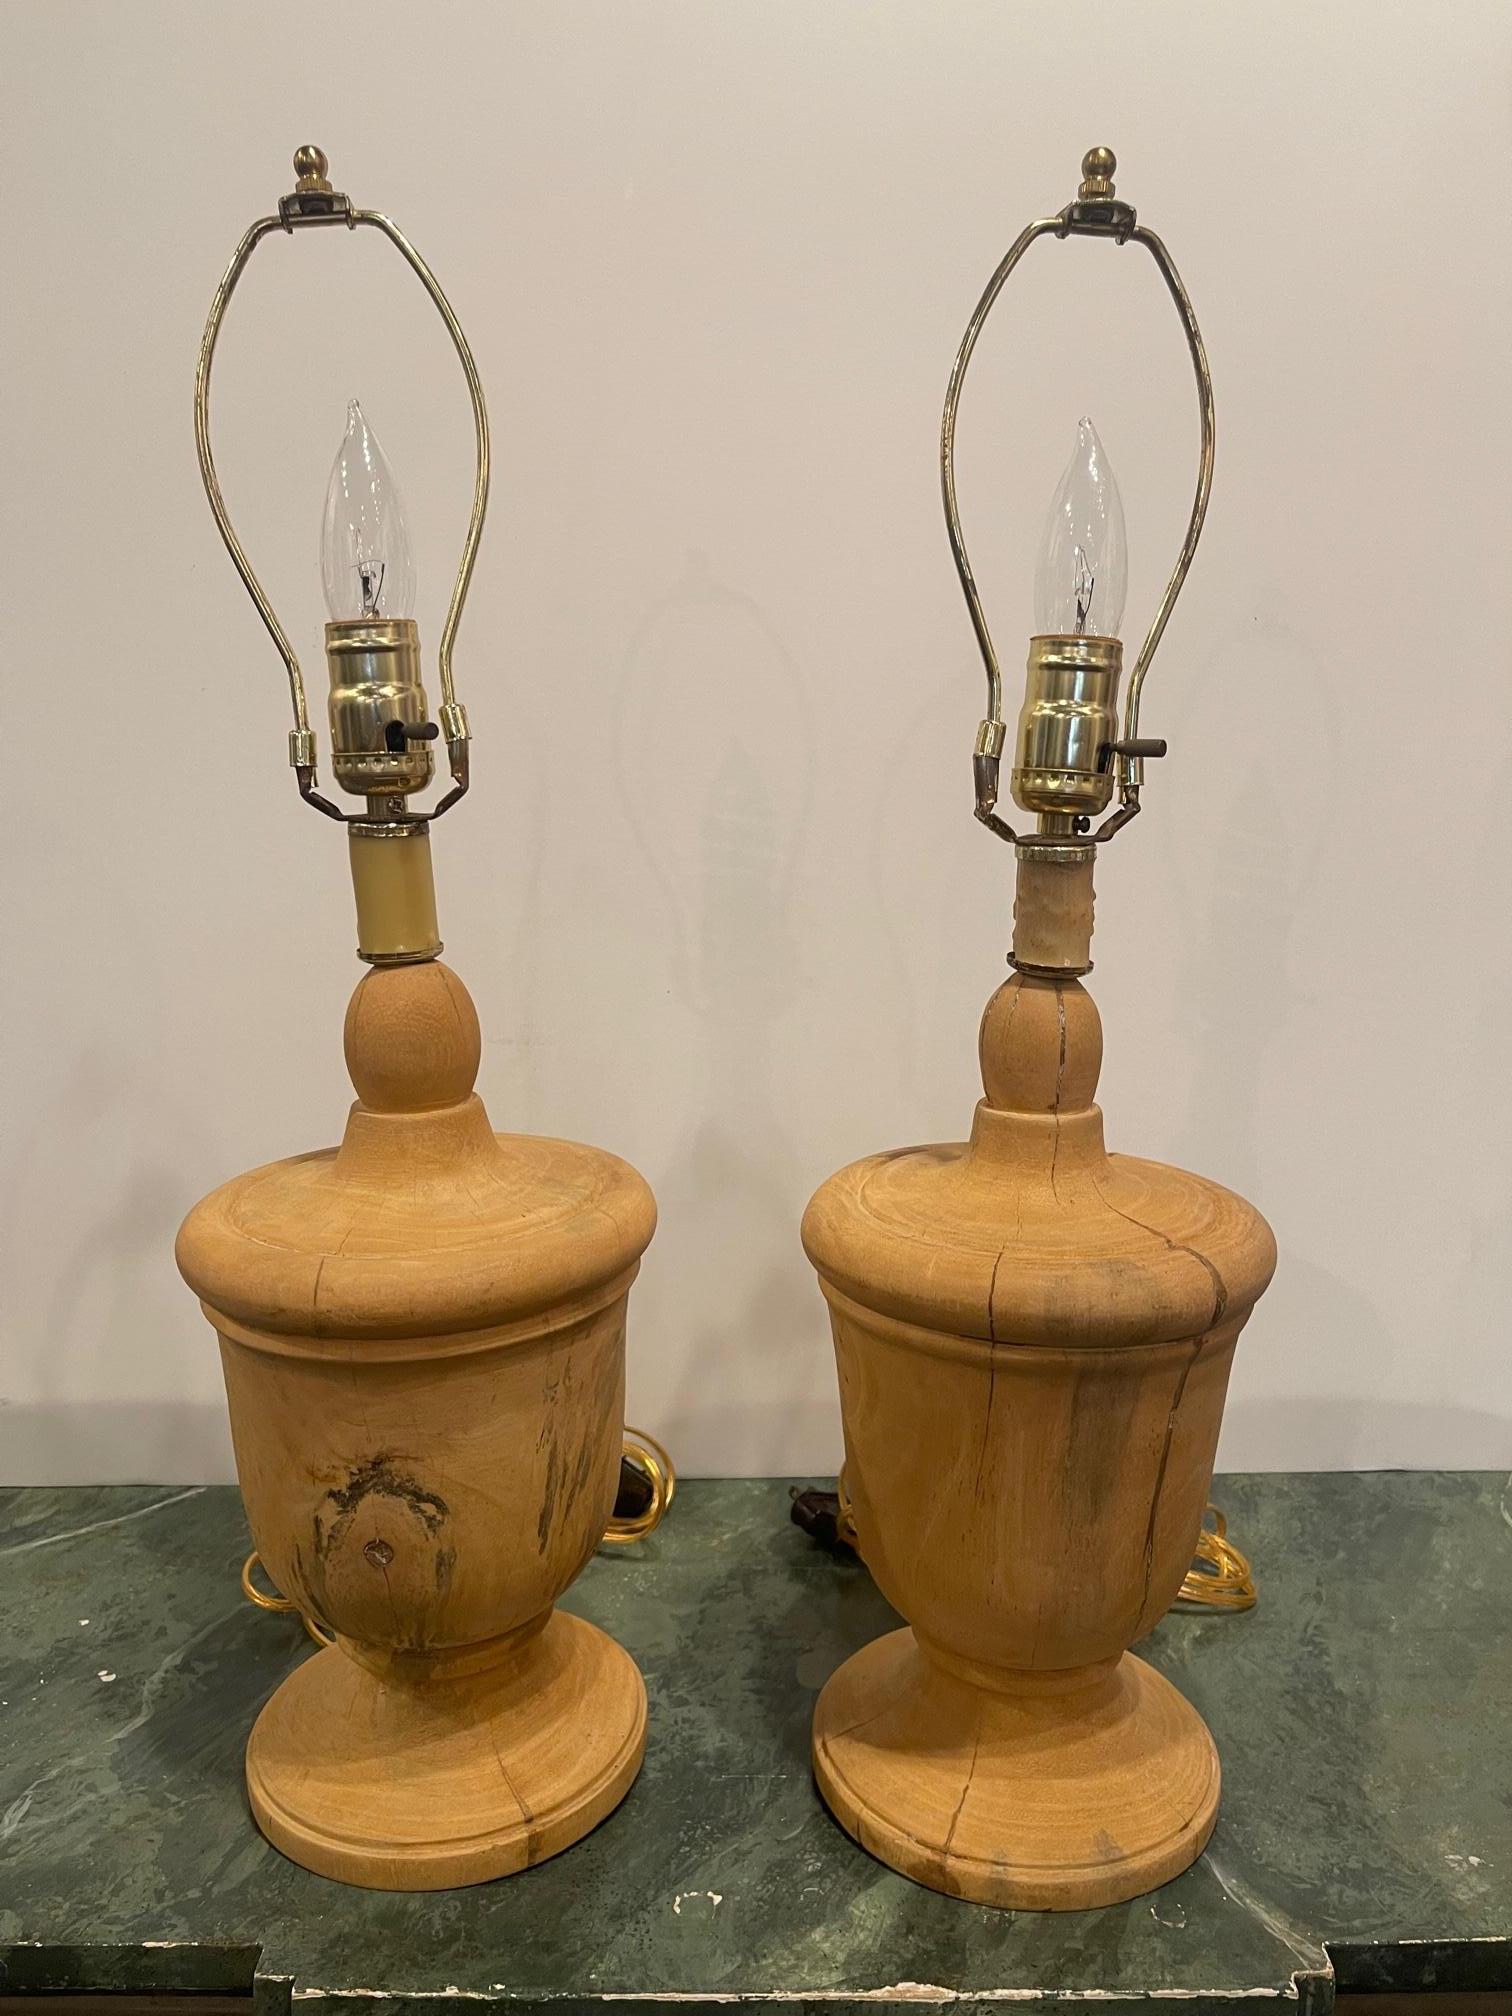 19th century pair of capitol fragments adapted as lamps.